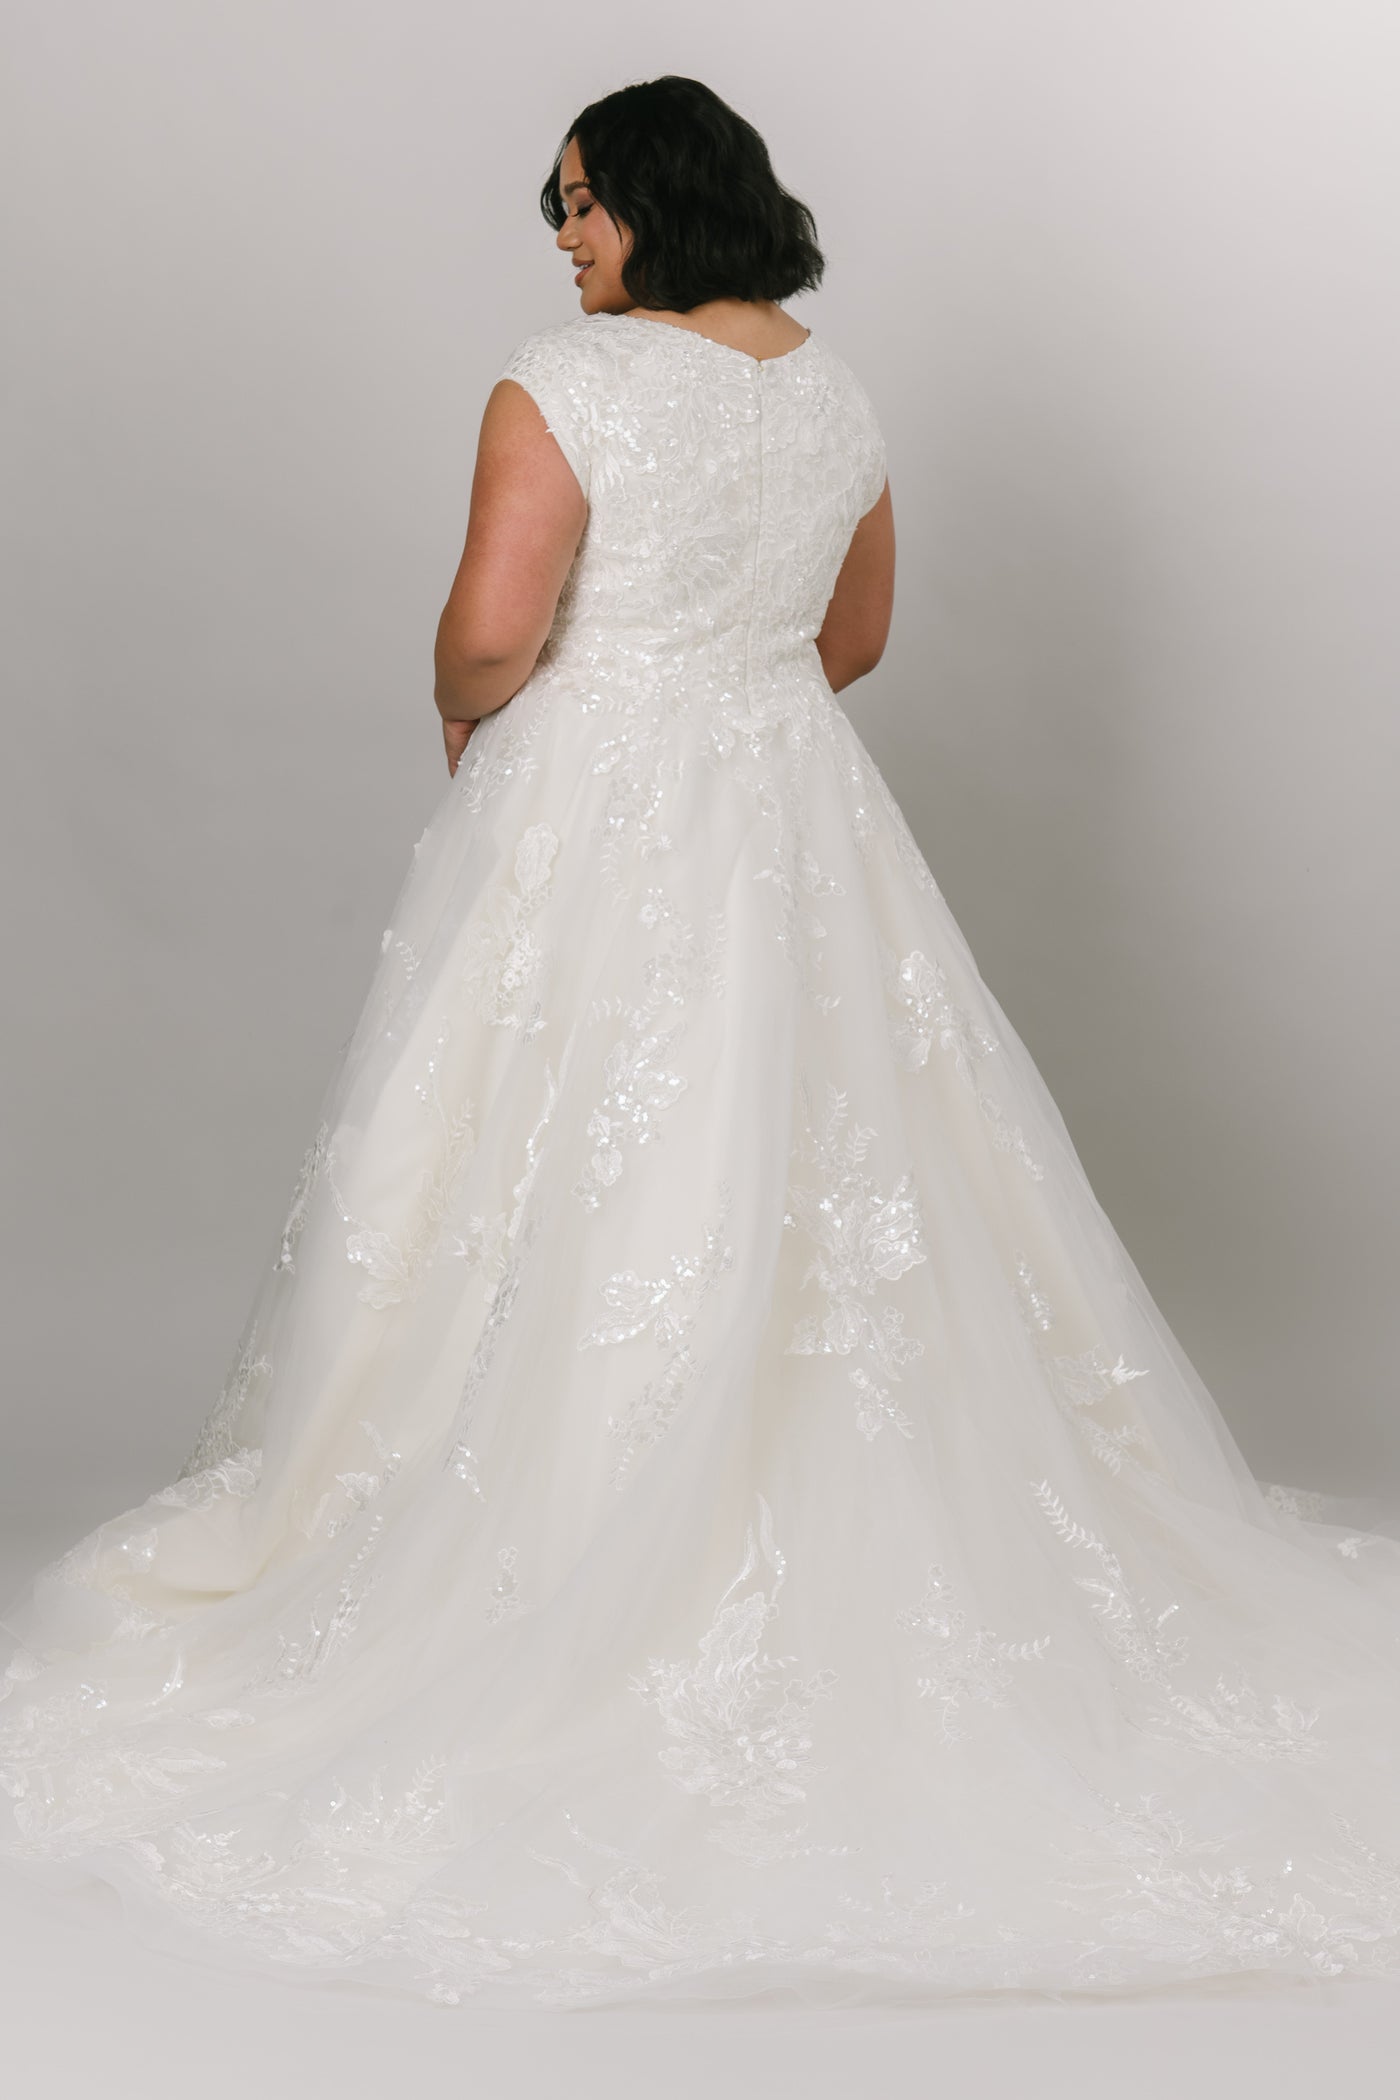 Plus size: Back view of modest wedding dress featuring a beautiful square neckline and ballgown silhouette.